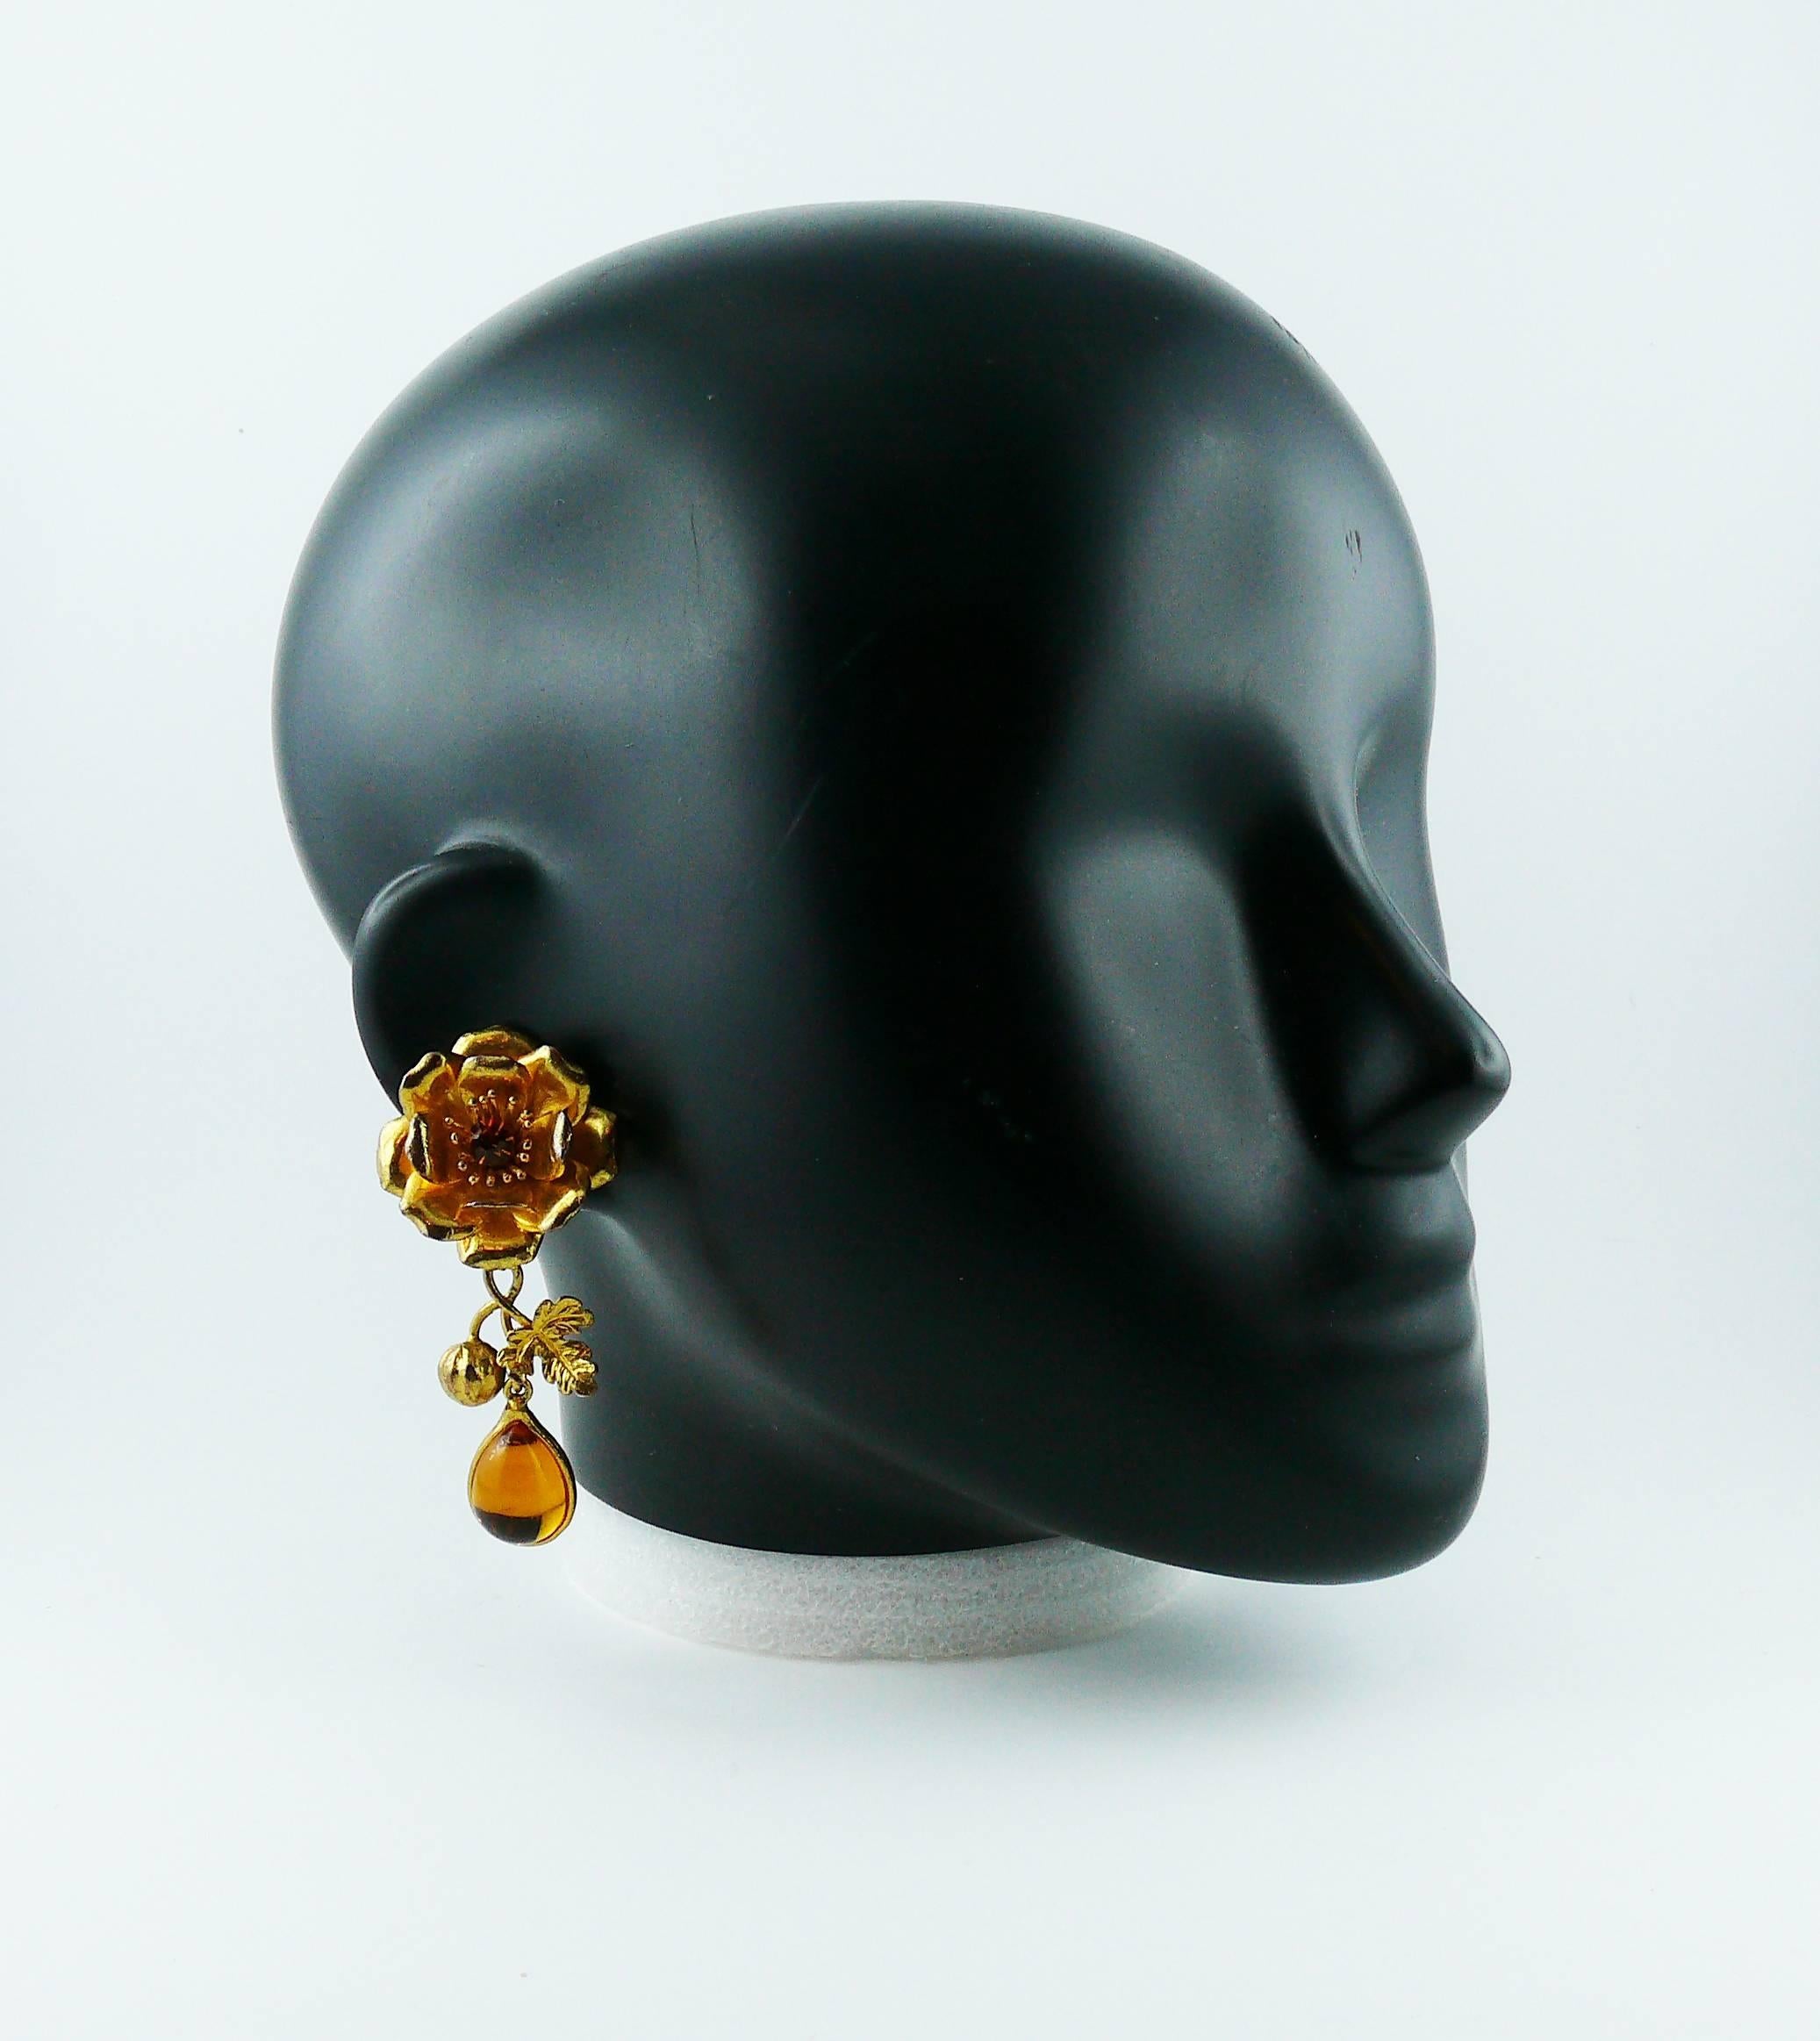 YVES SAINT LAURENT Rive Gauche gold toned floral dangling earrings (clip-on) embellished with crystal and glass cabochon.

Marked YVES SAINT LAURENT Rive Gauche Made in France.

Indicative measurements : length approx. 7.1 cm (2.80 inches) / max.